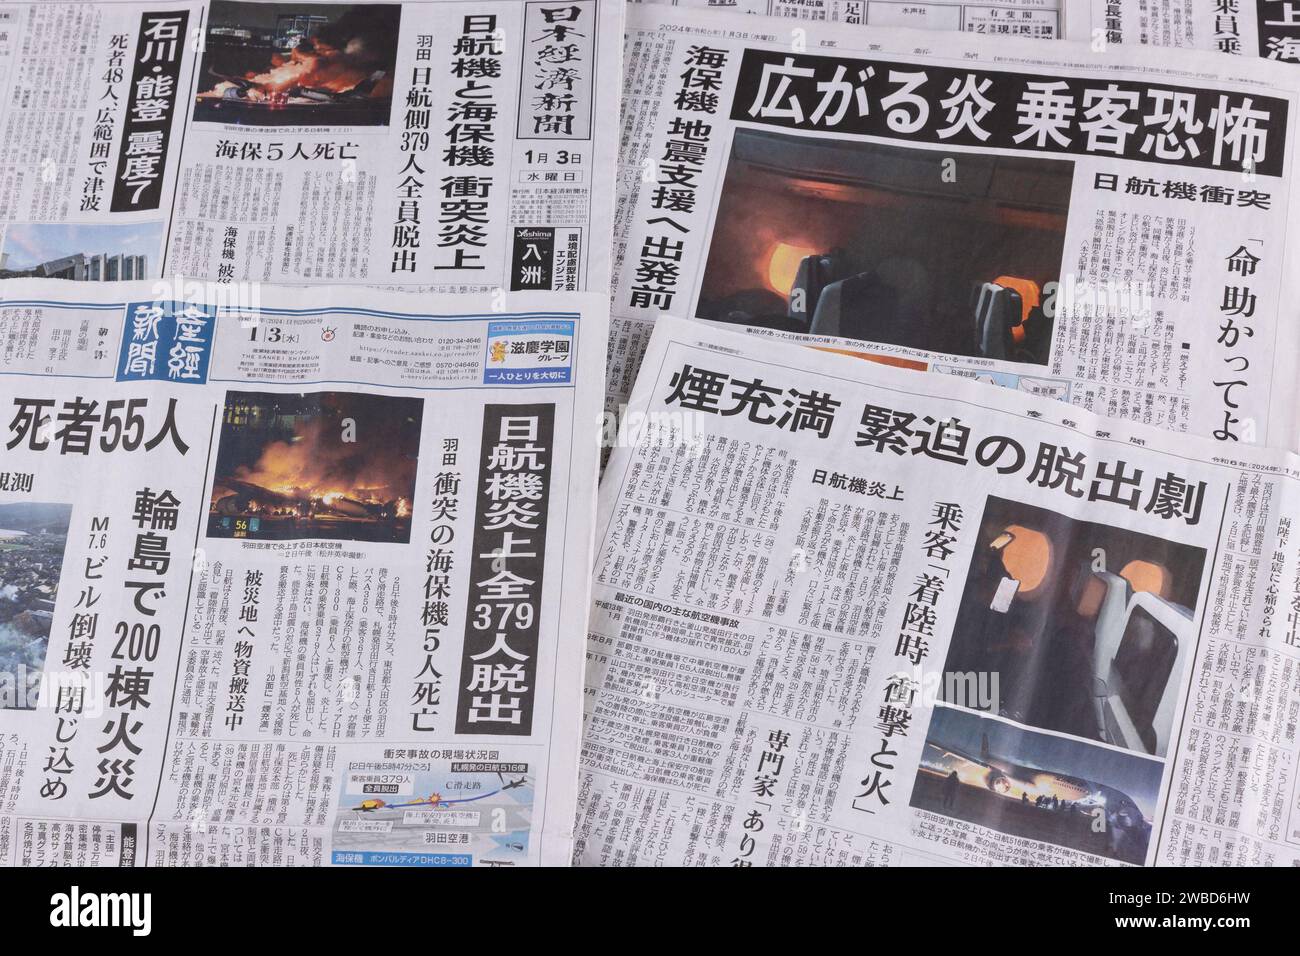 Japanese newspapers on January 3, 2024 reporting the 2024 Haneda Airport runway collision are seen in Tokyo, Japan on January 10, 2024. On January 2, 2024, a runway collision occurred between an Airbus A350, operating Japan Airlines Flight 516 and a De Havilland Canada Dash 8 operated by the Japan Coast Guard at Haneda Airport in Tokyo, Japan. After the collision, both airplane aircraft caught fire. Five of the six crew of the Japan Coast Guard on Dash 8 died, but all 367 passengers and 12 crew on the Airbus A350 survived. Credit: Shingo Tosha/AFLO/Alamy Live News Stock Photo